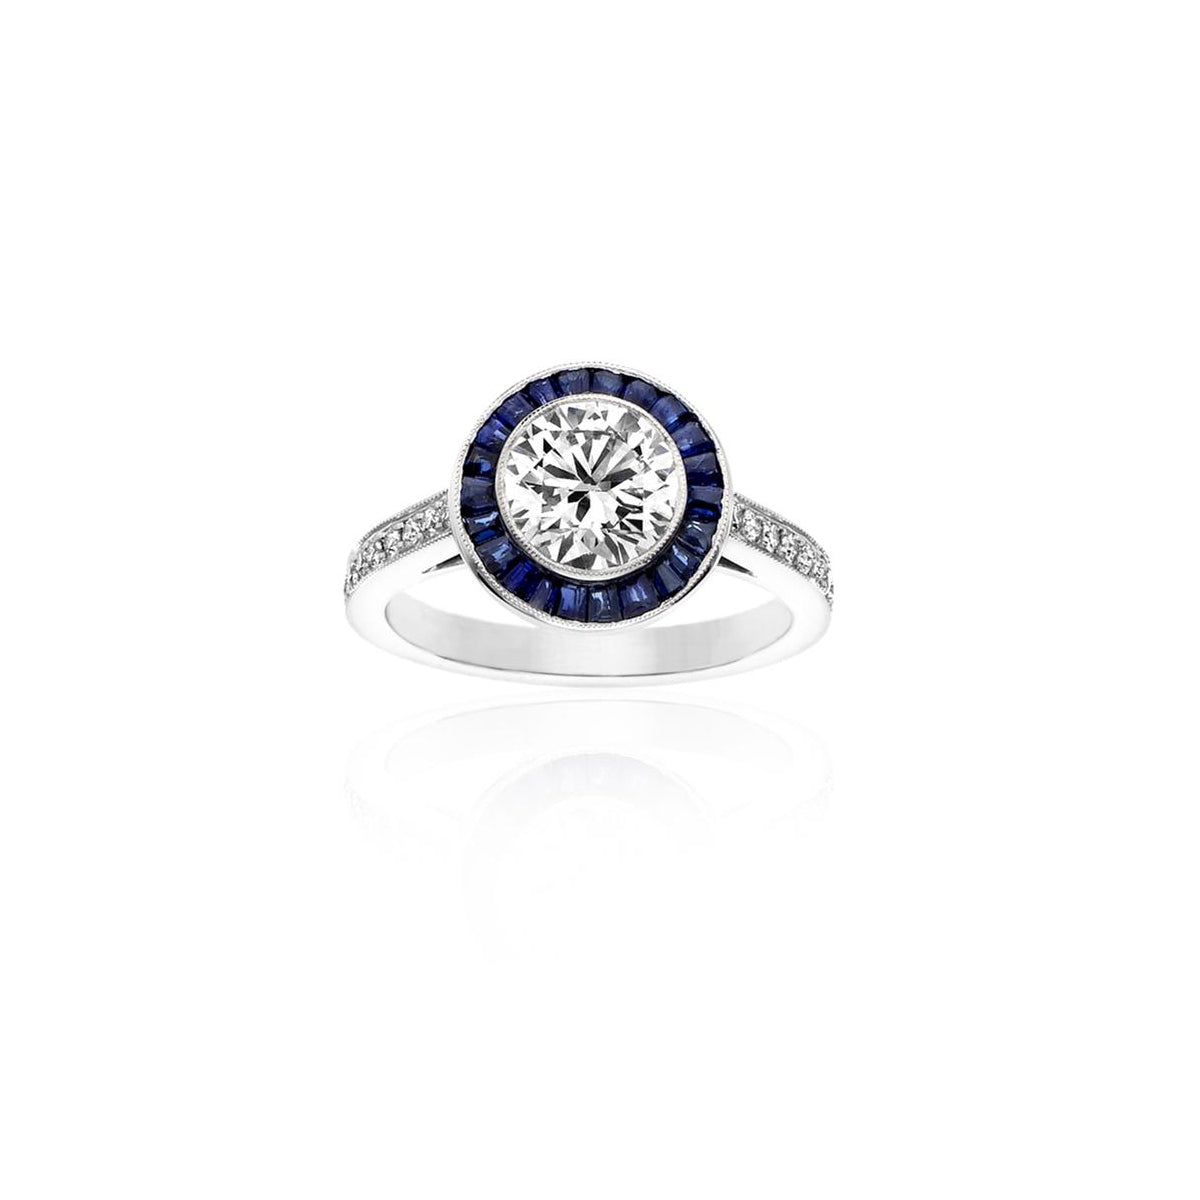 Round Brilliant Diamond and Sapphire Baguette Ring